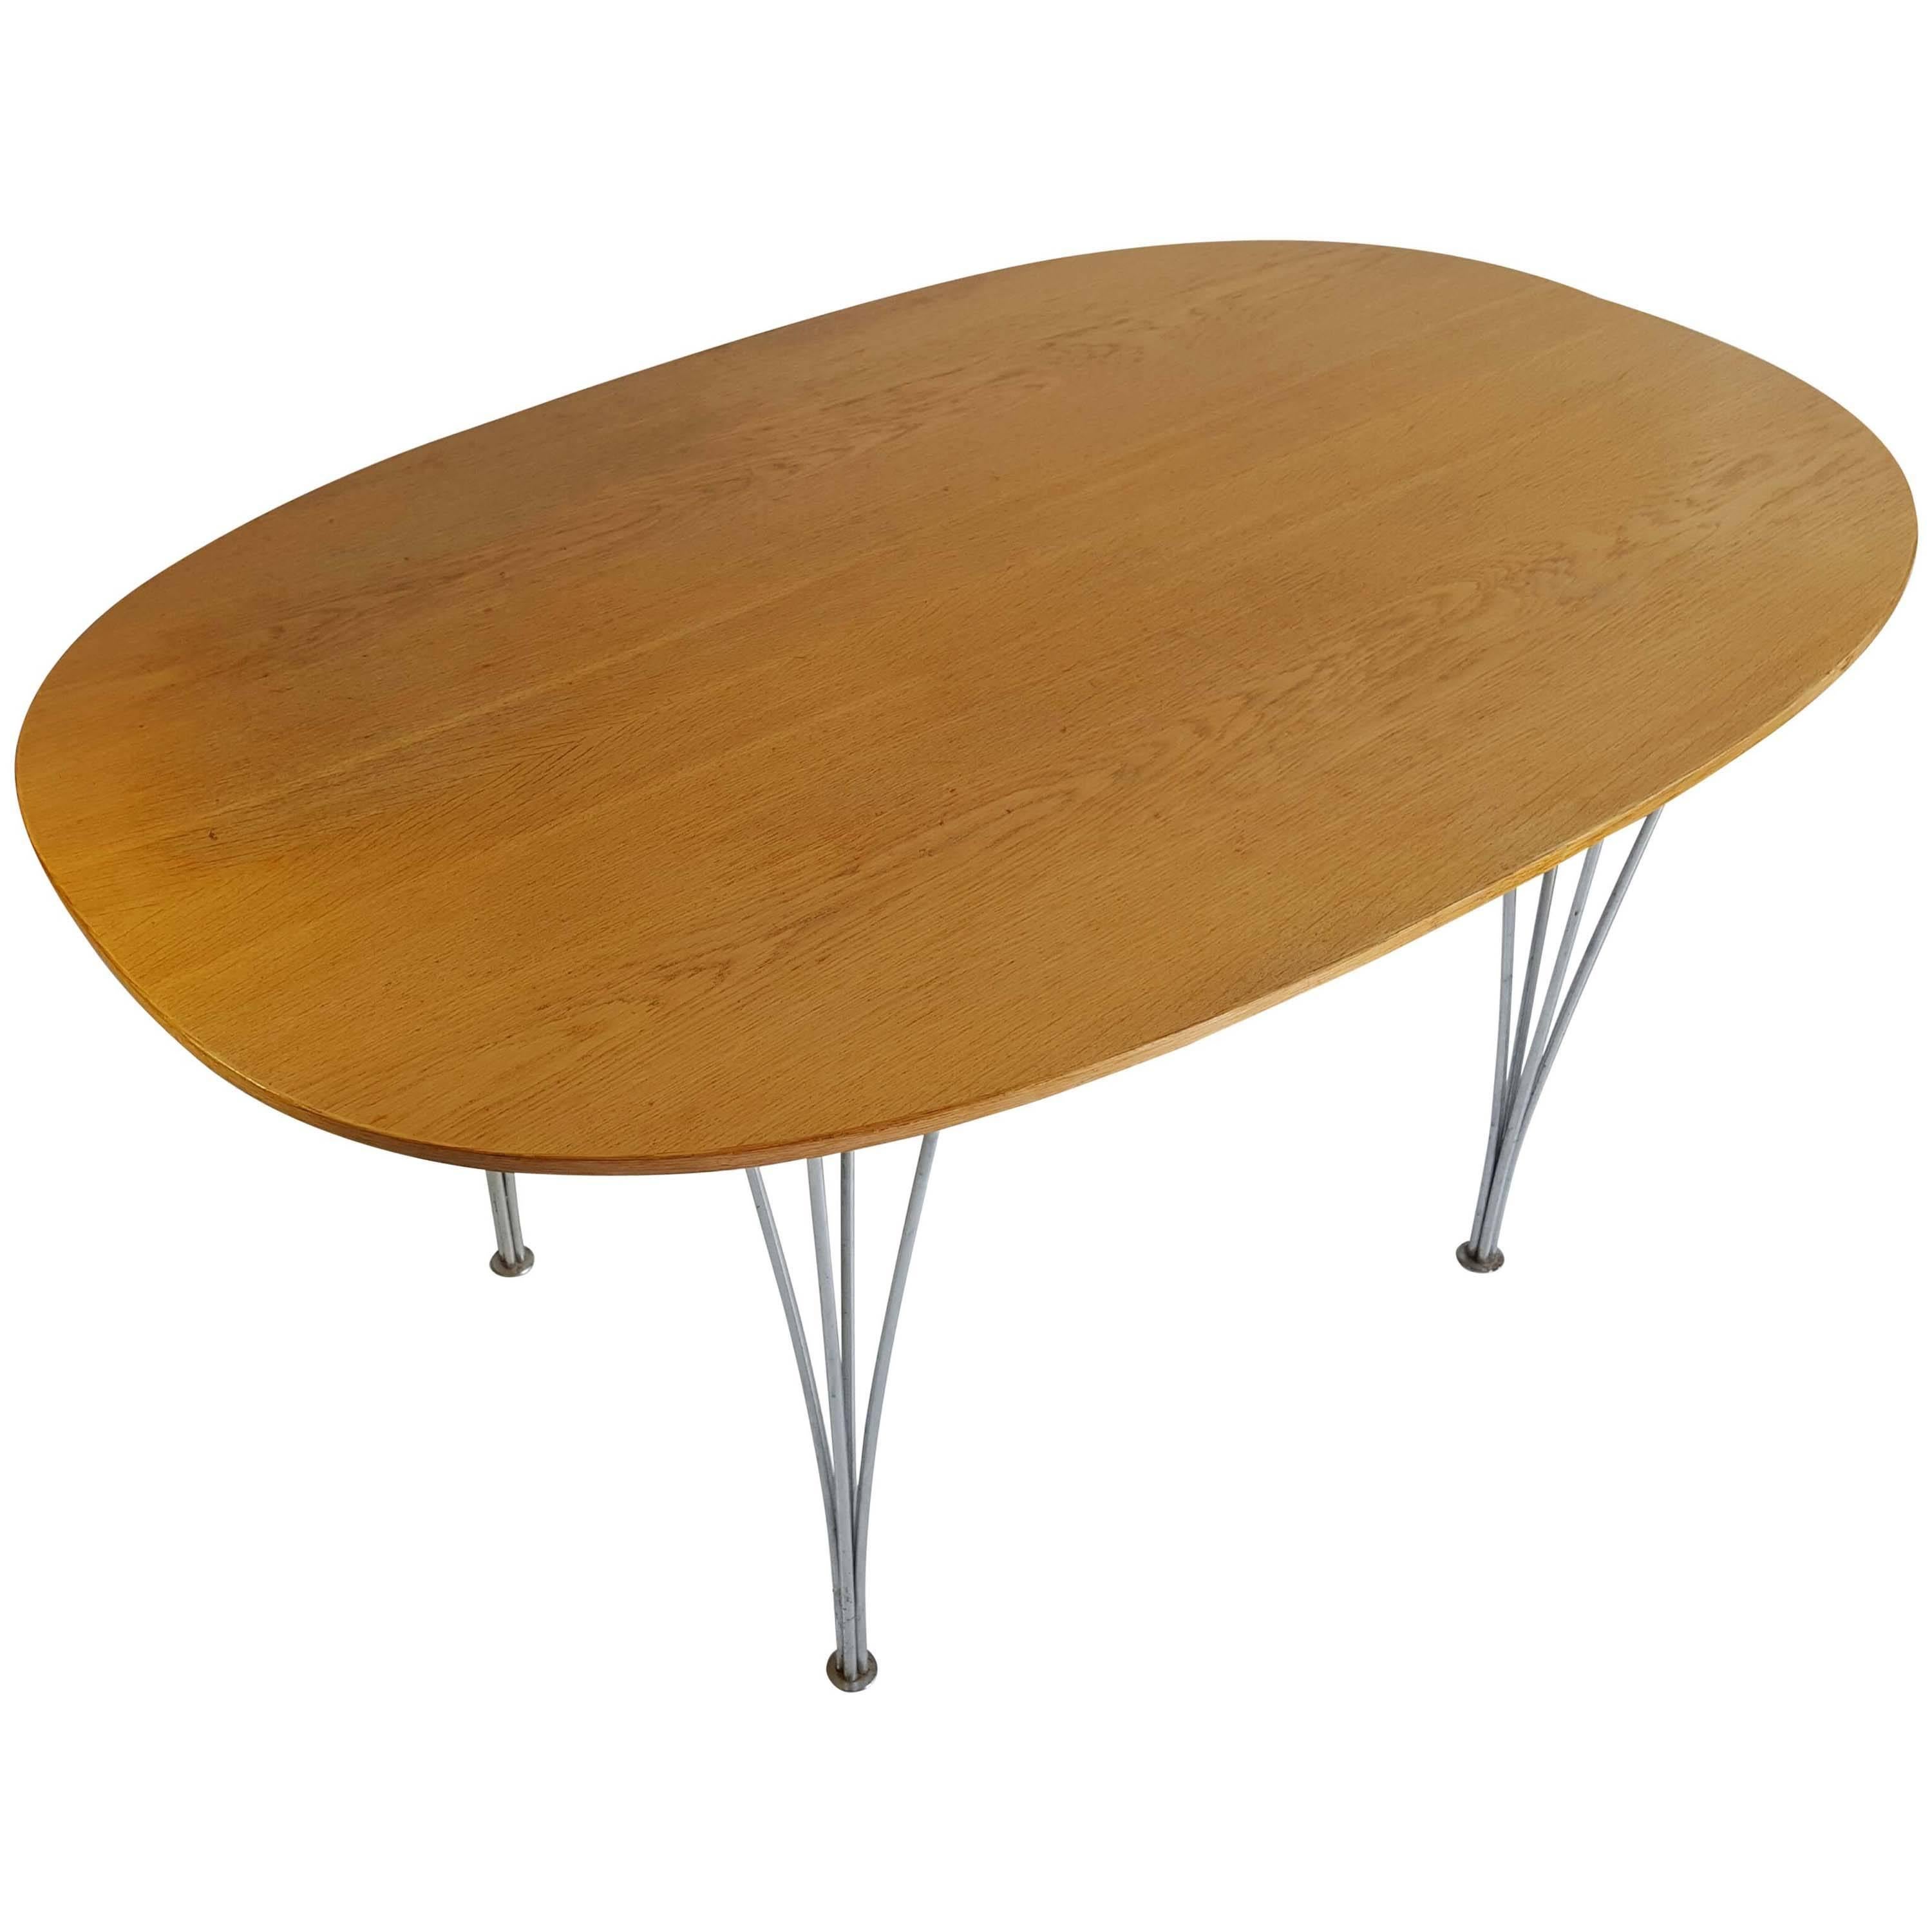 Super Ellipse Dining Table by Piet Hein and Bruno Mathsson